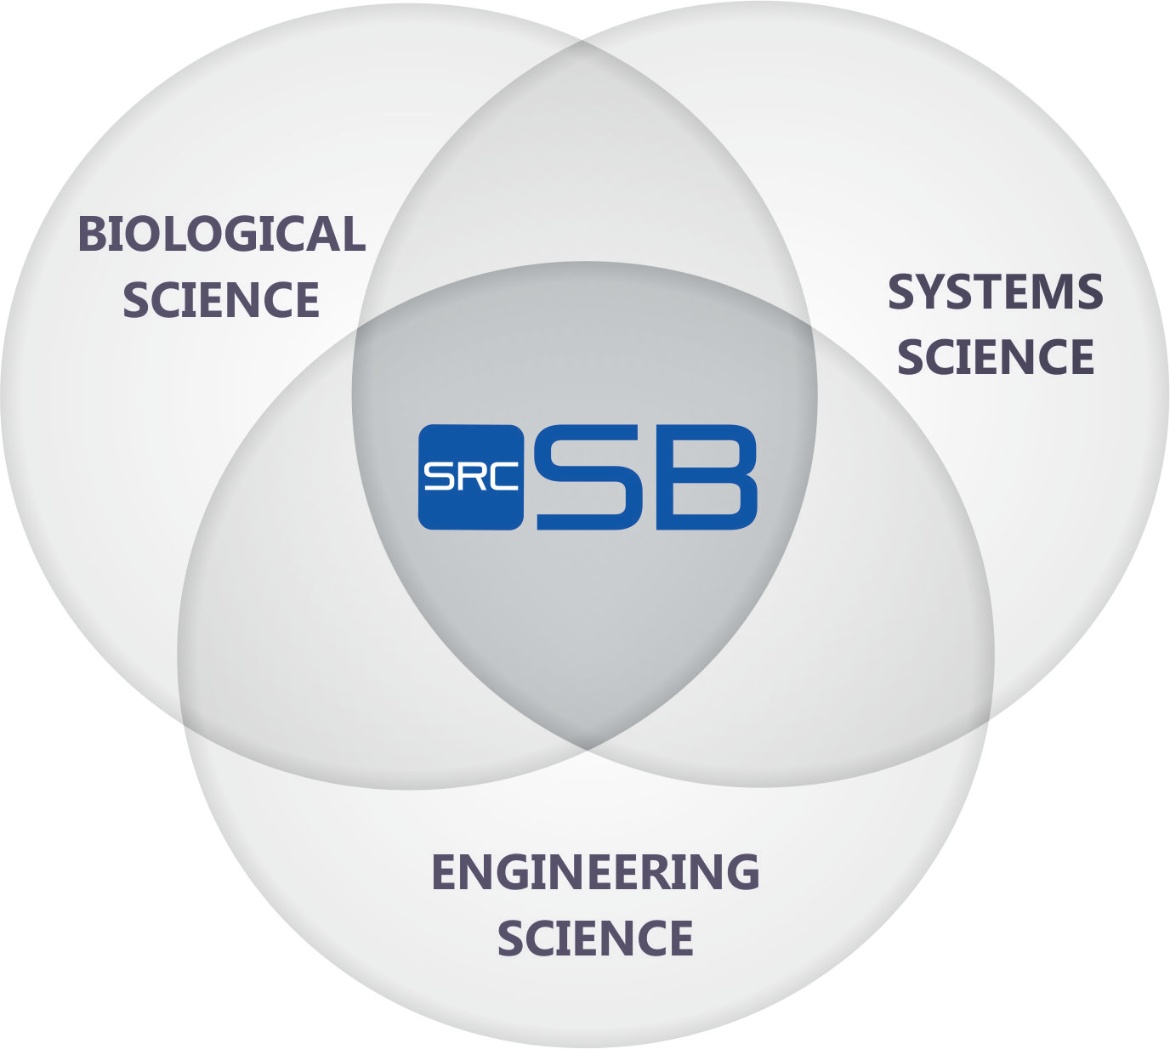 Picture of three circles: Integration of life sciences, systems sciences and engineering